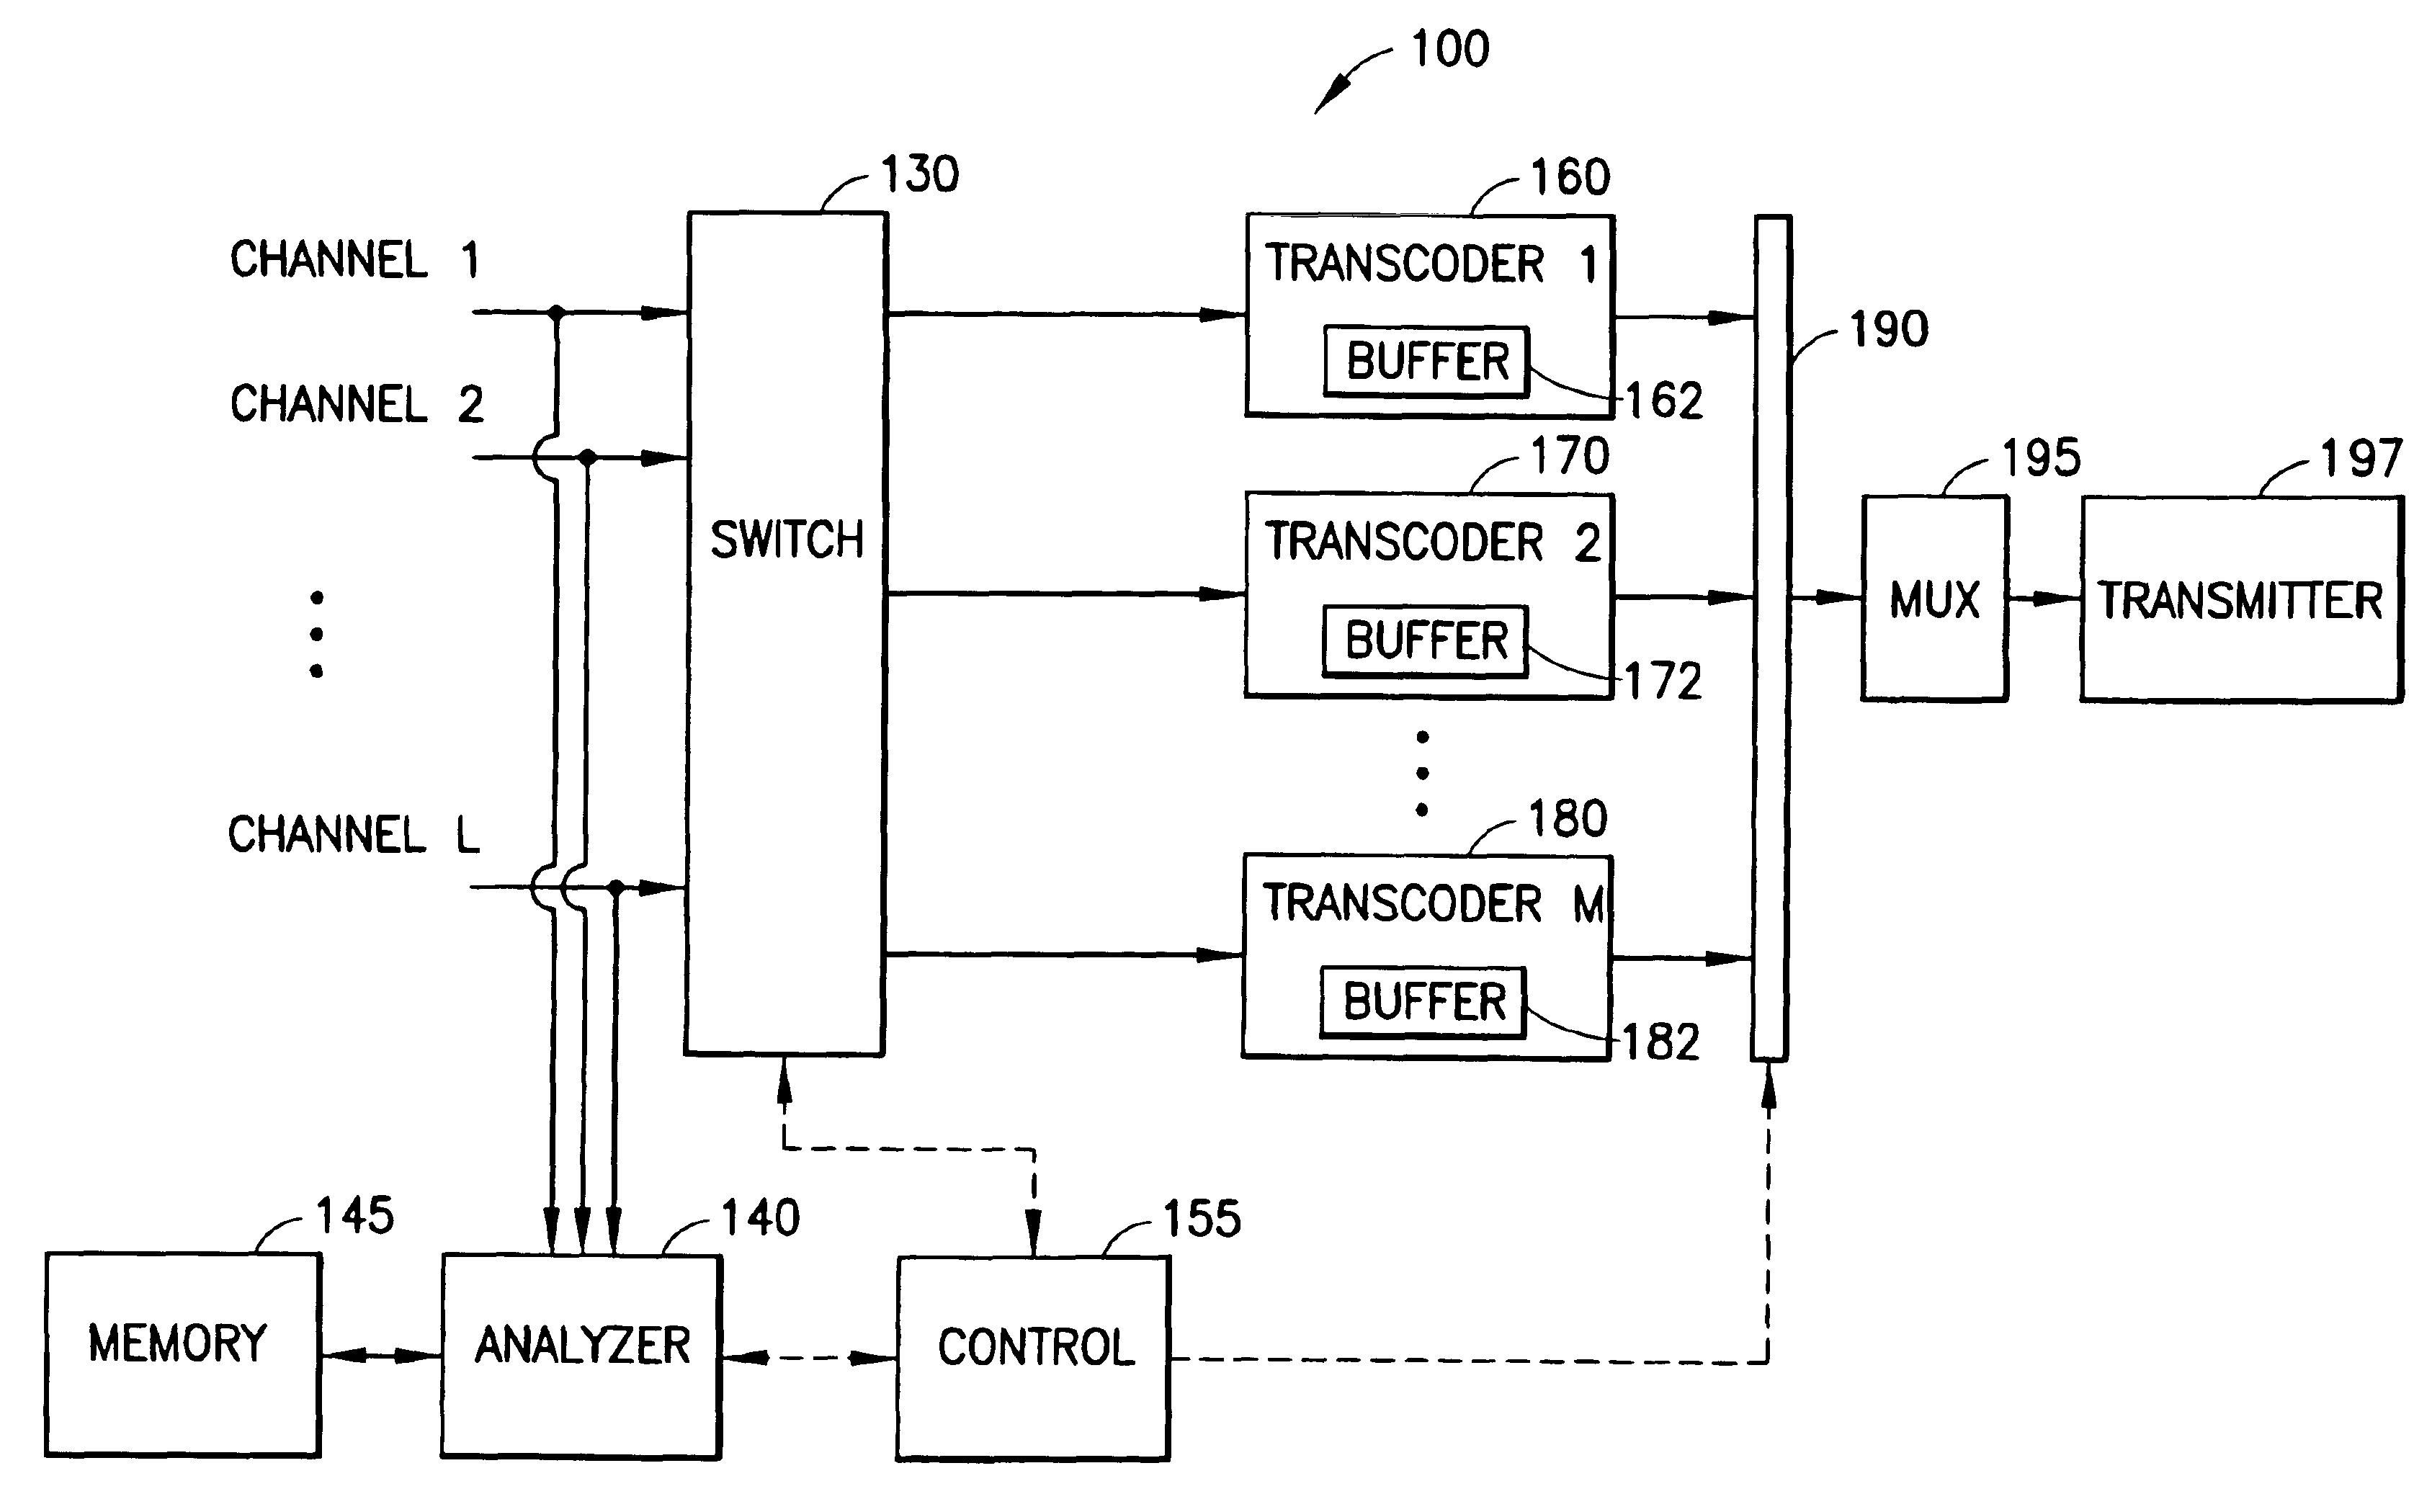 Processing mode selection for channels in a video multi-processor system